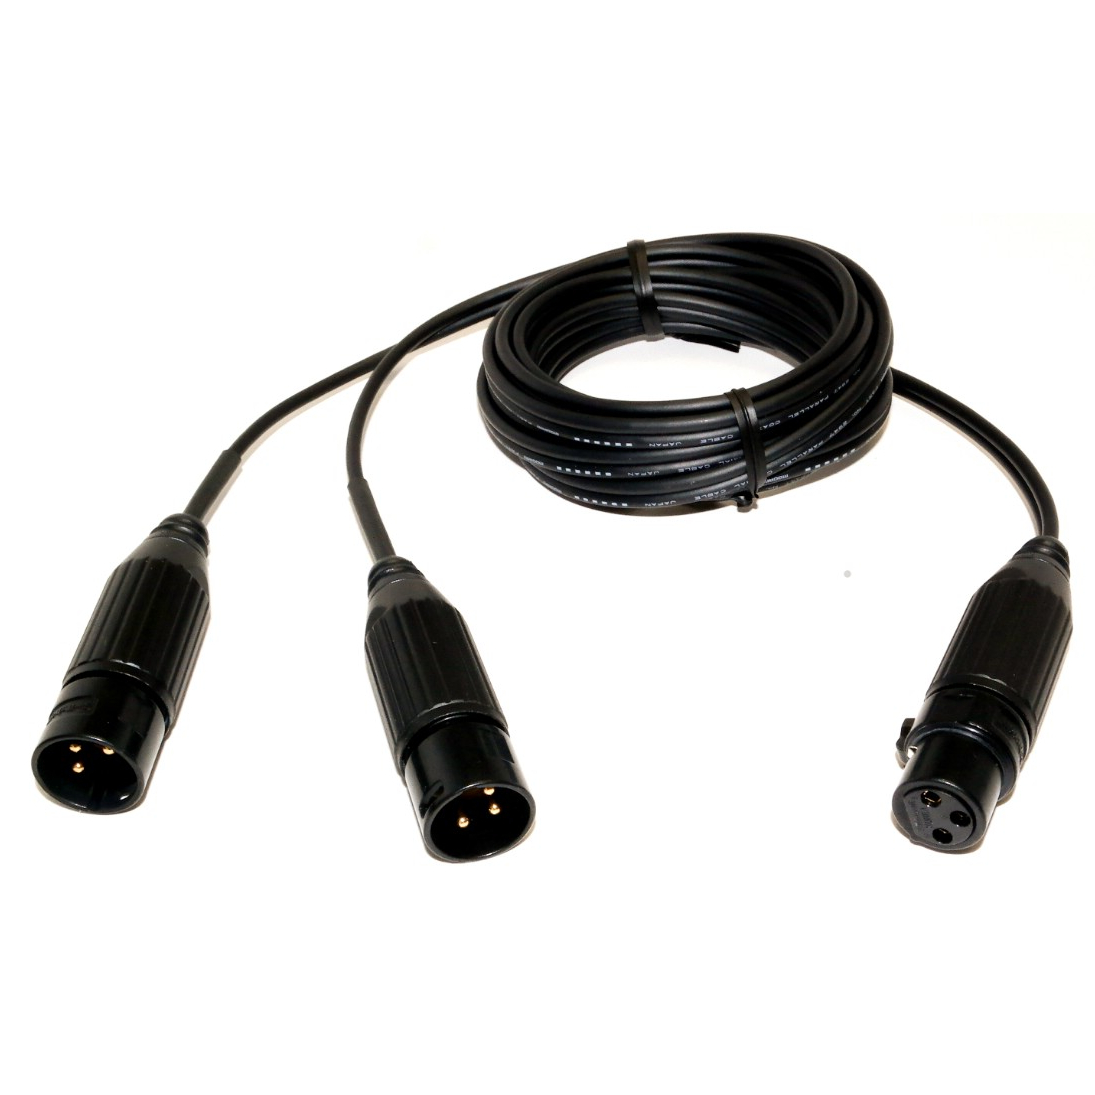 SP-XLRF3-XLRM3-2 - 3 pin XLR female to dual 3 pin XLR male adapter - select length in option box Questions & Answers